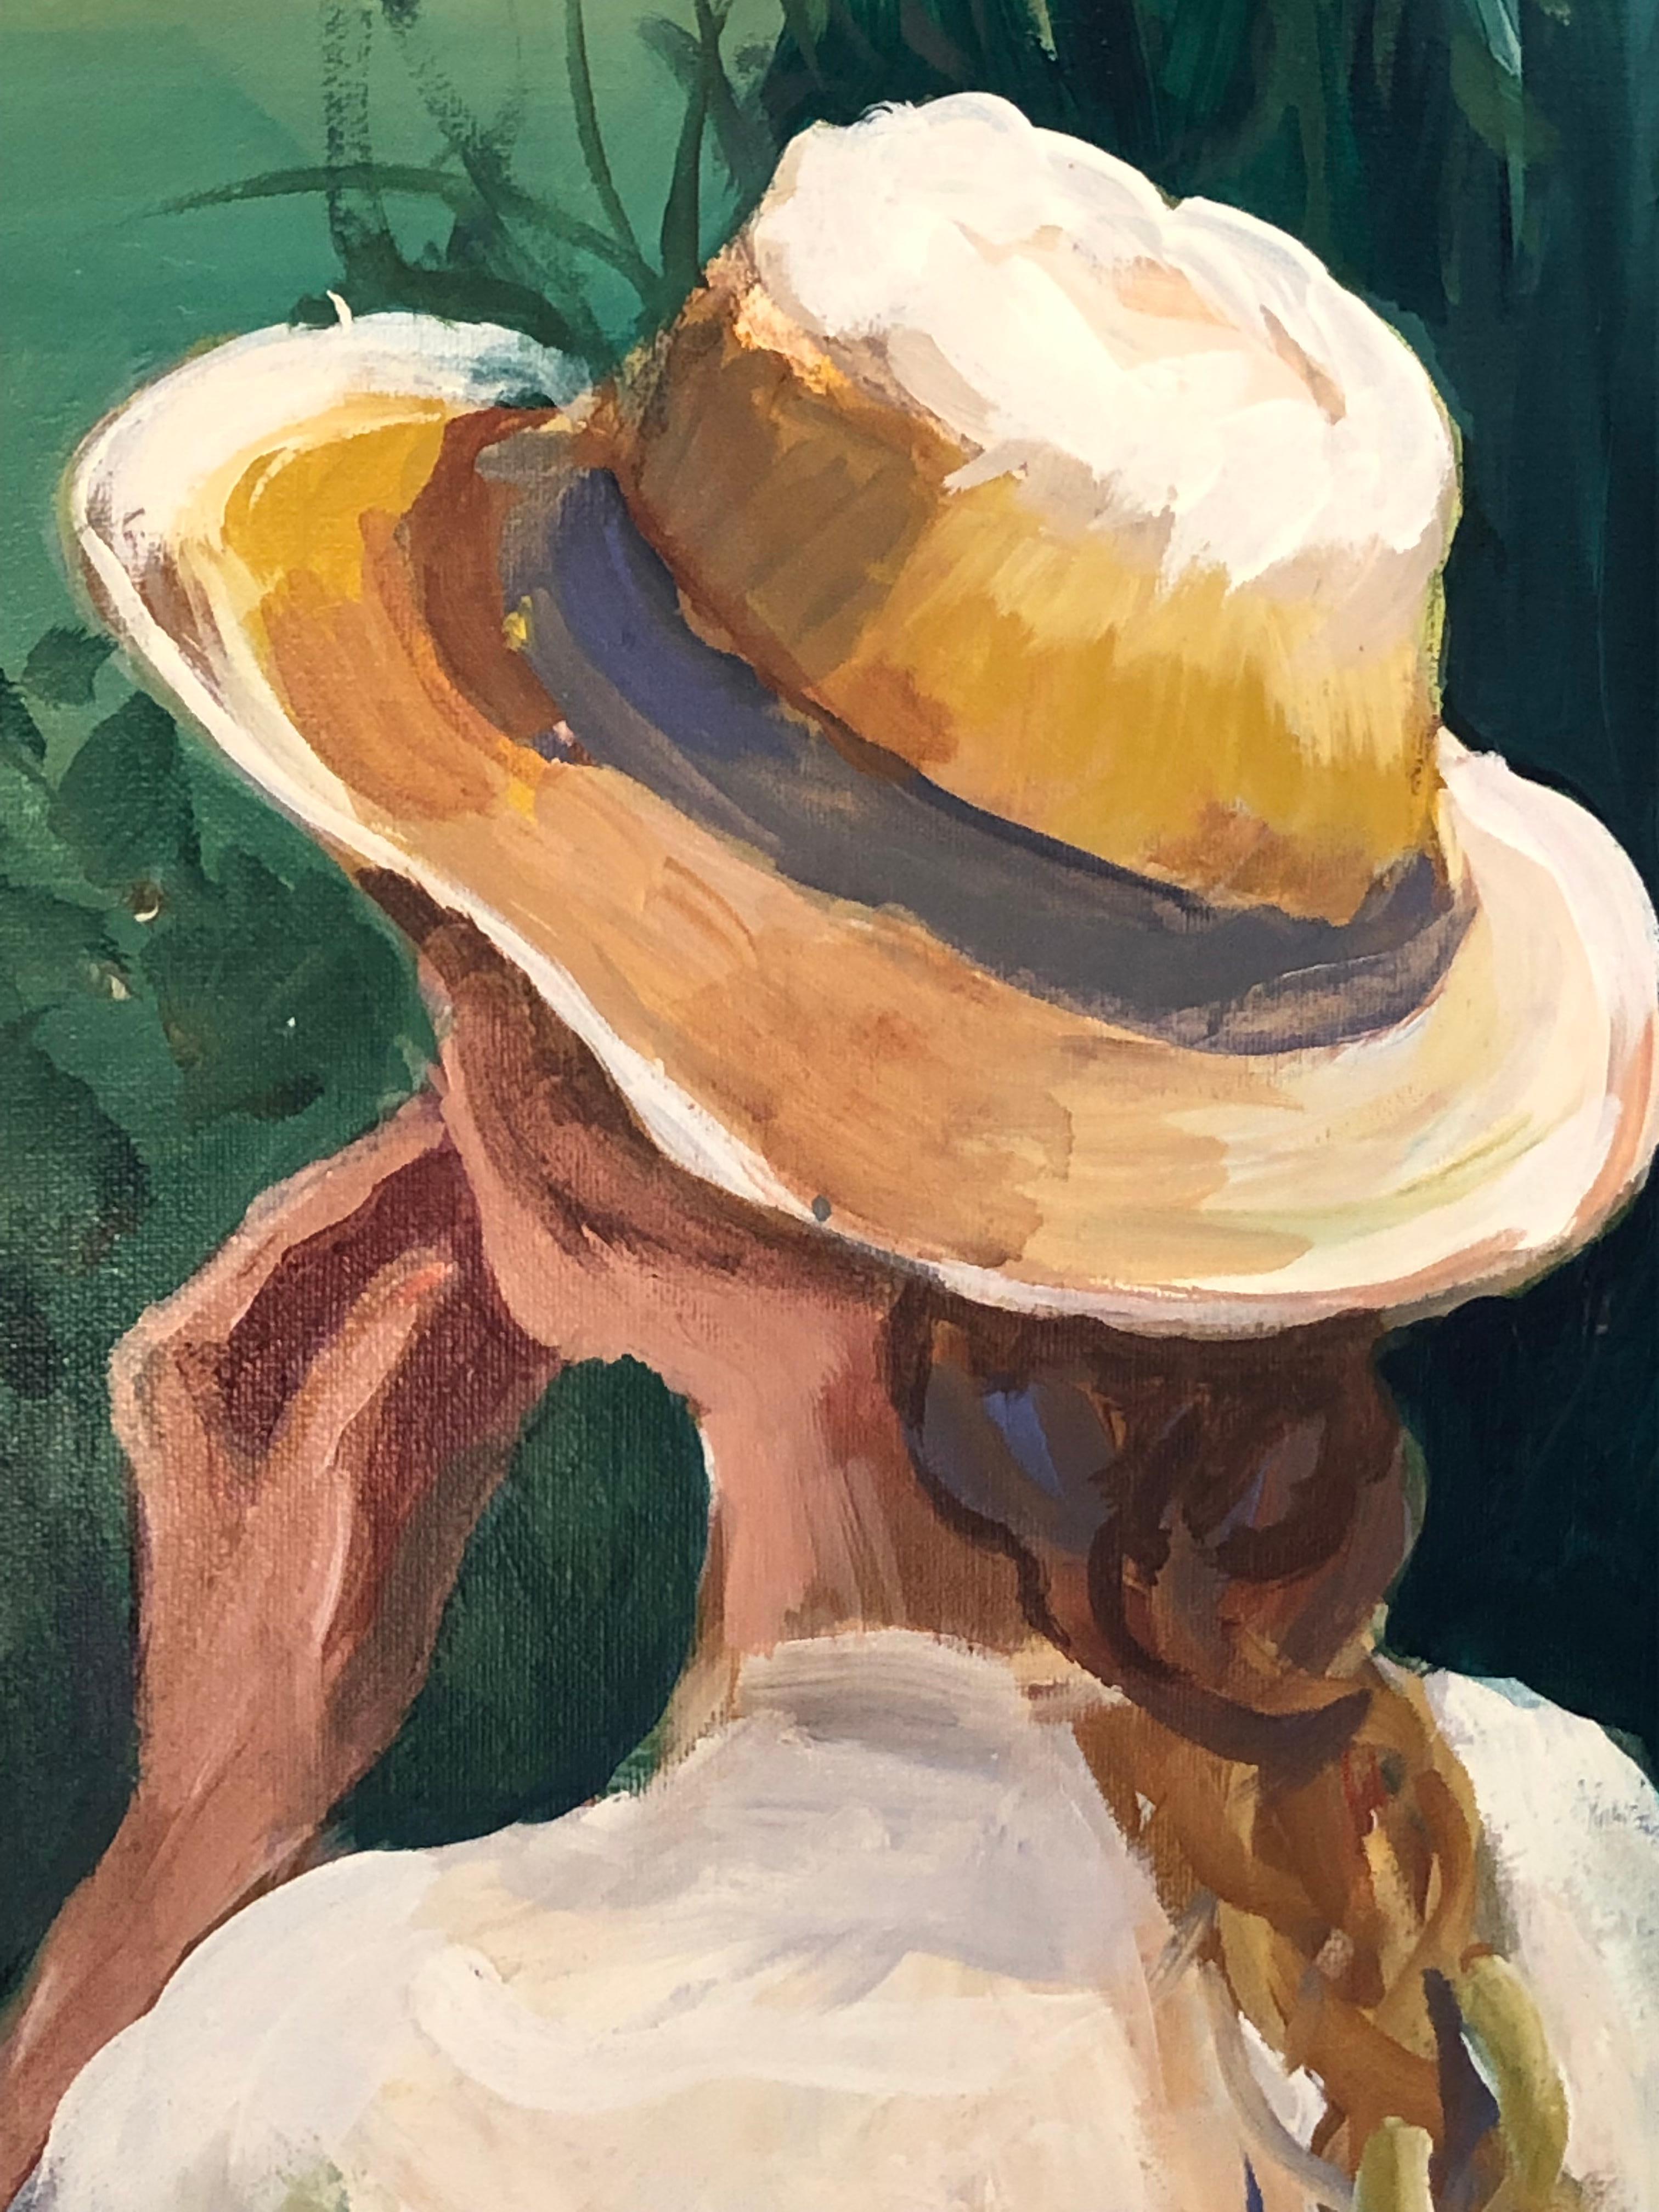 Large charming and graphic original painting by California artist Bonnie Lowe Duffebach, 1923-2017. Subject is a young woman with long braid and hat, seen from the back, gazing at a bucolic landscape.
Duffebach owned the Queen of Arts Gallery in